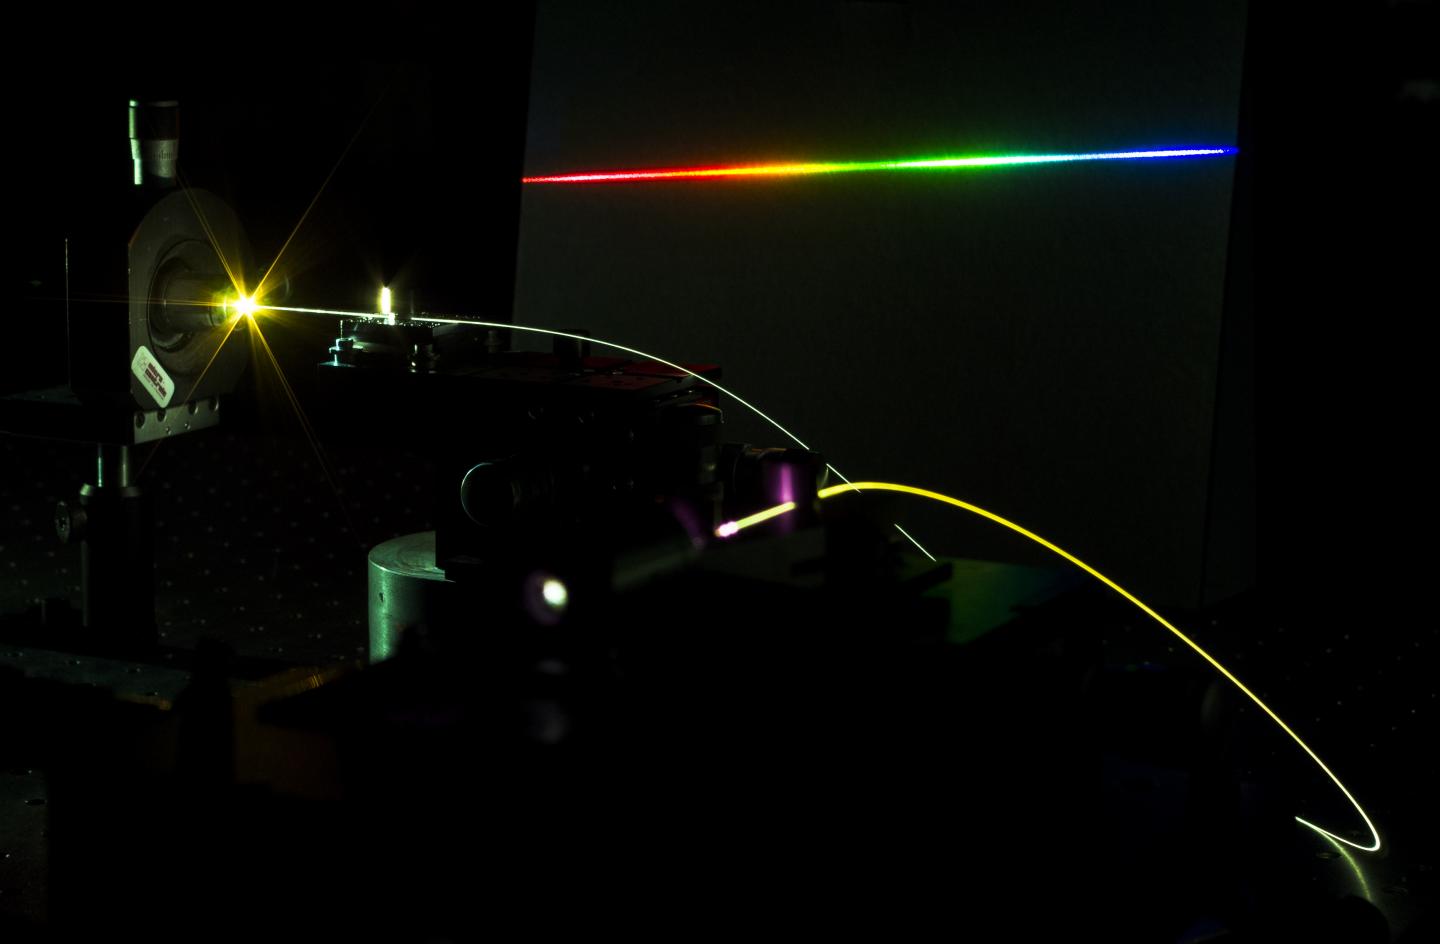 An ultrashort pulse is sent into an optical fiber and produces new frequency components via intense light-matter interactions. INRS and University of Sussex.